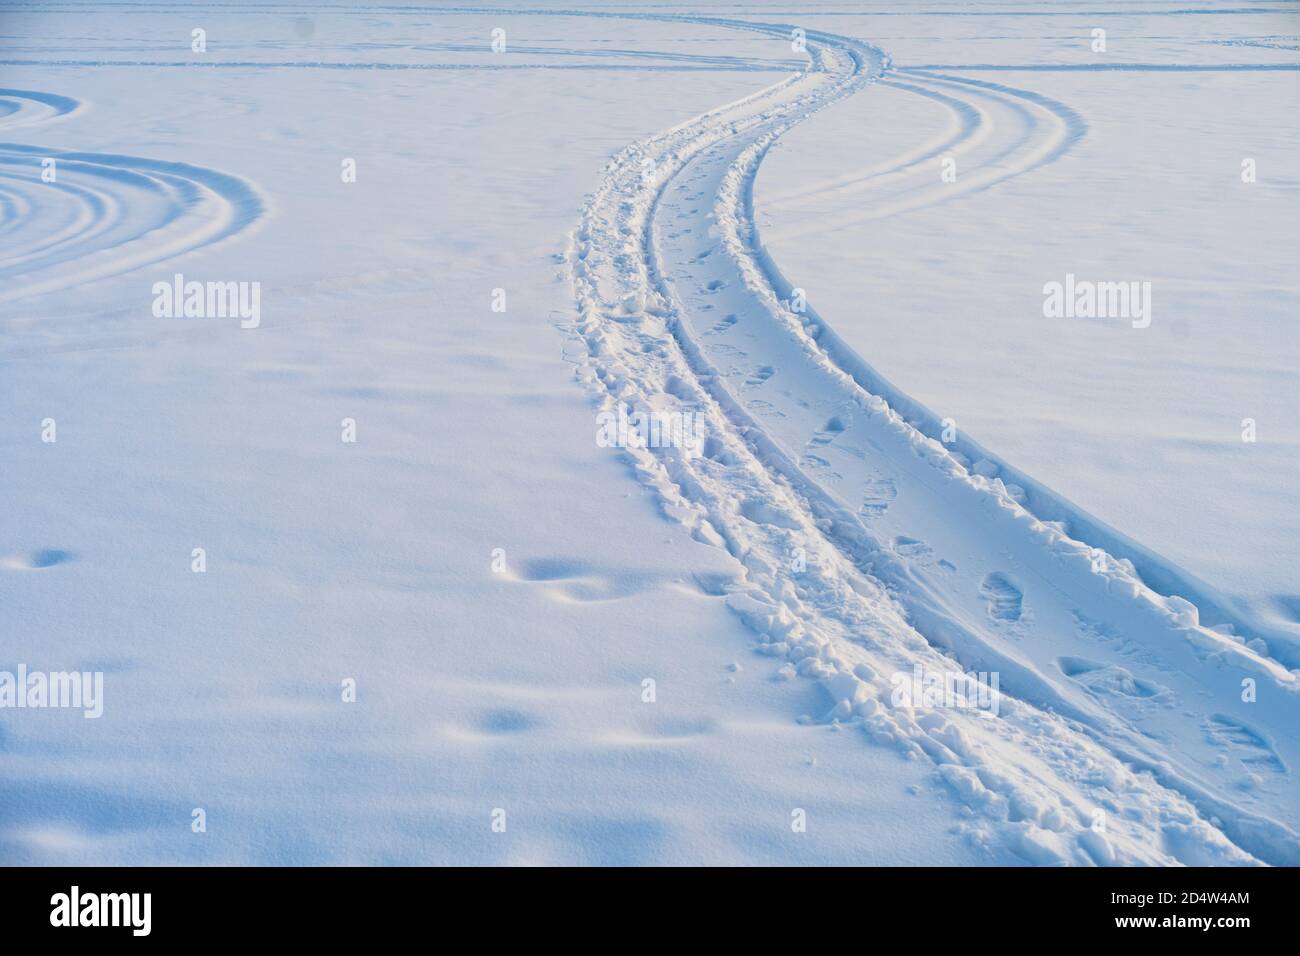 Snowmobile and people left footprints in the snow on a winter day. Stock Photo